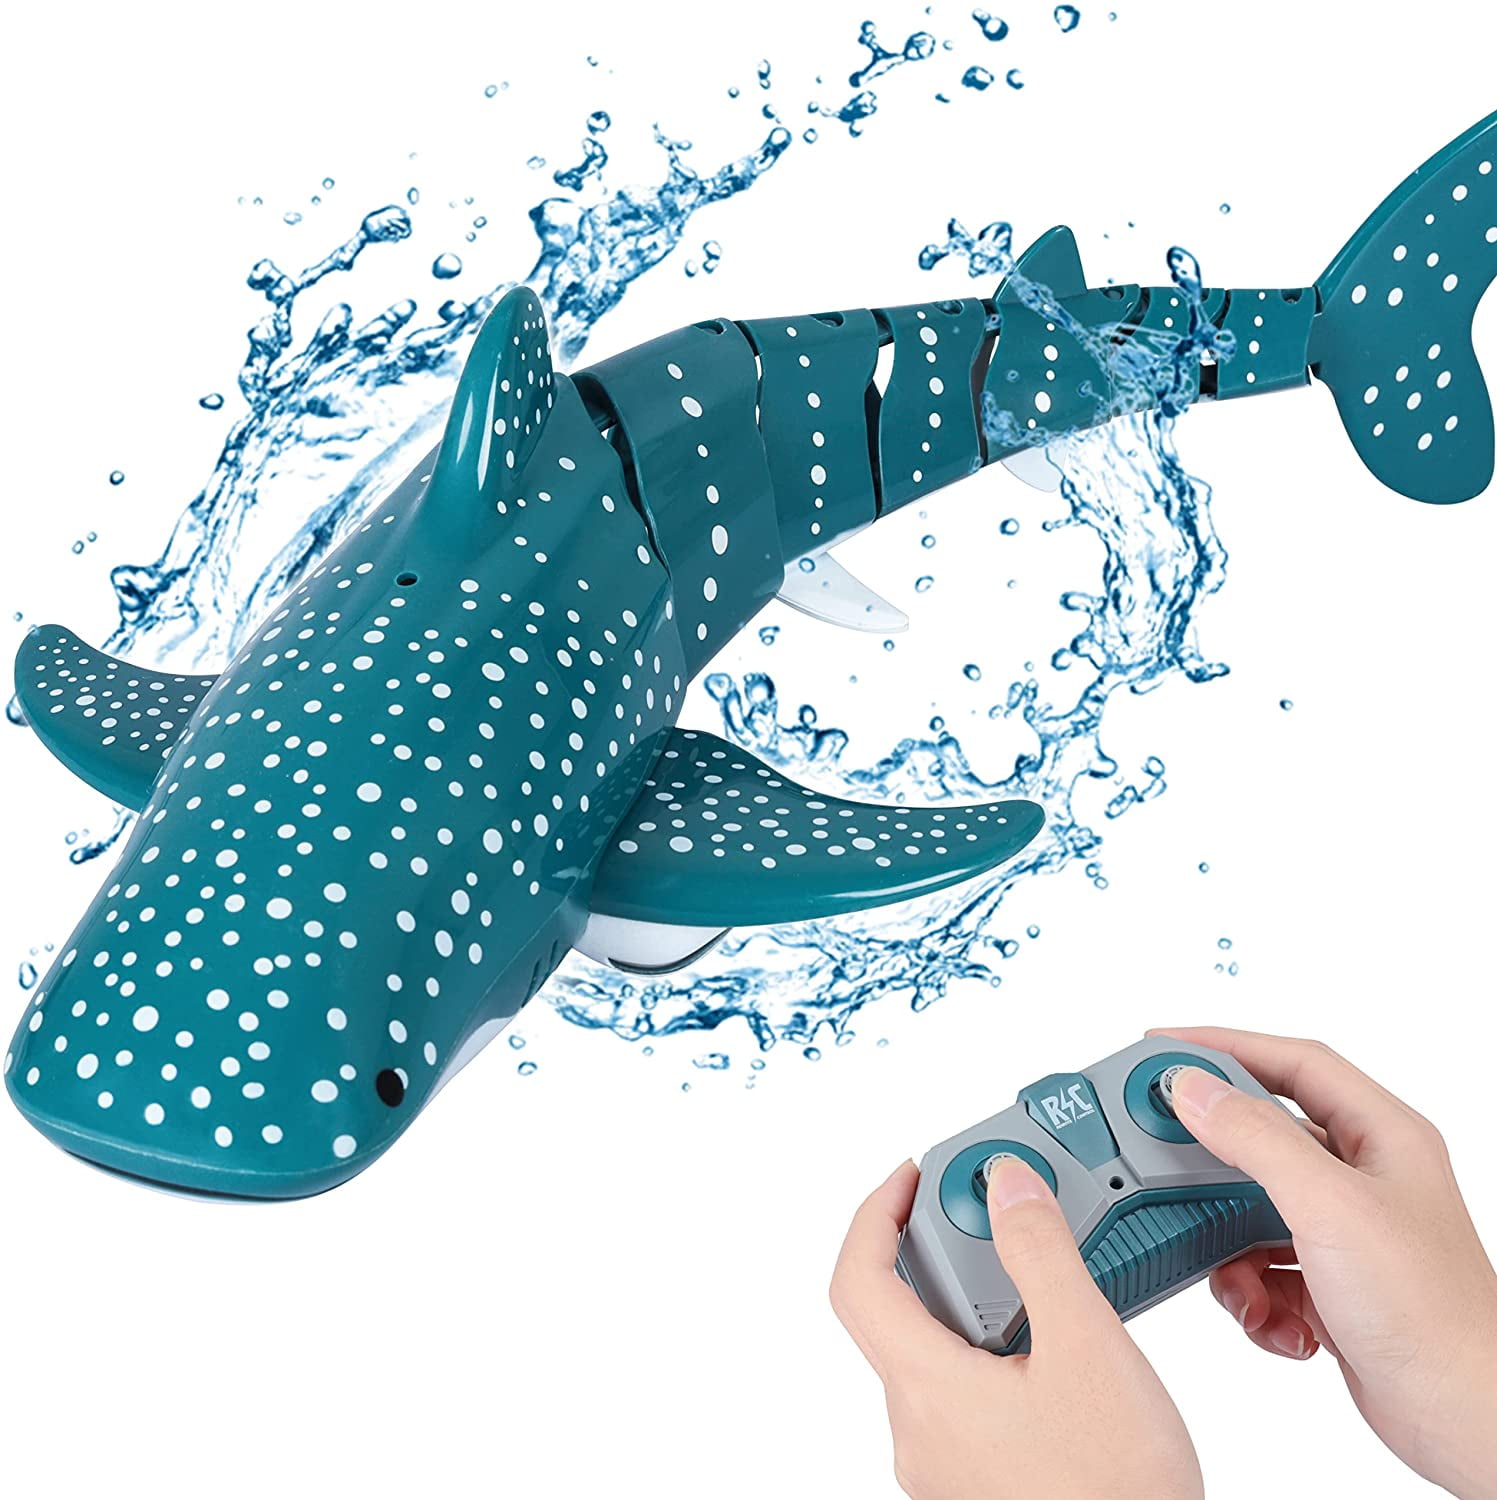 Remote Control Shark Toy Boat for Kids, 2.4GHz Fish Boat Electric